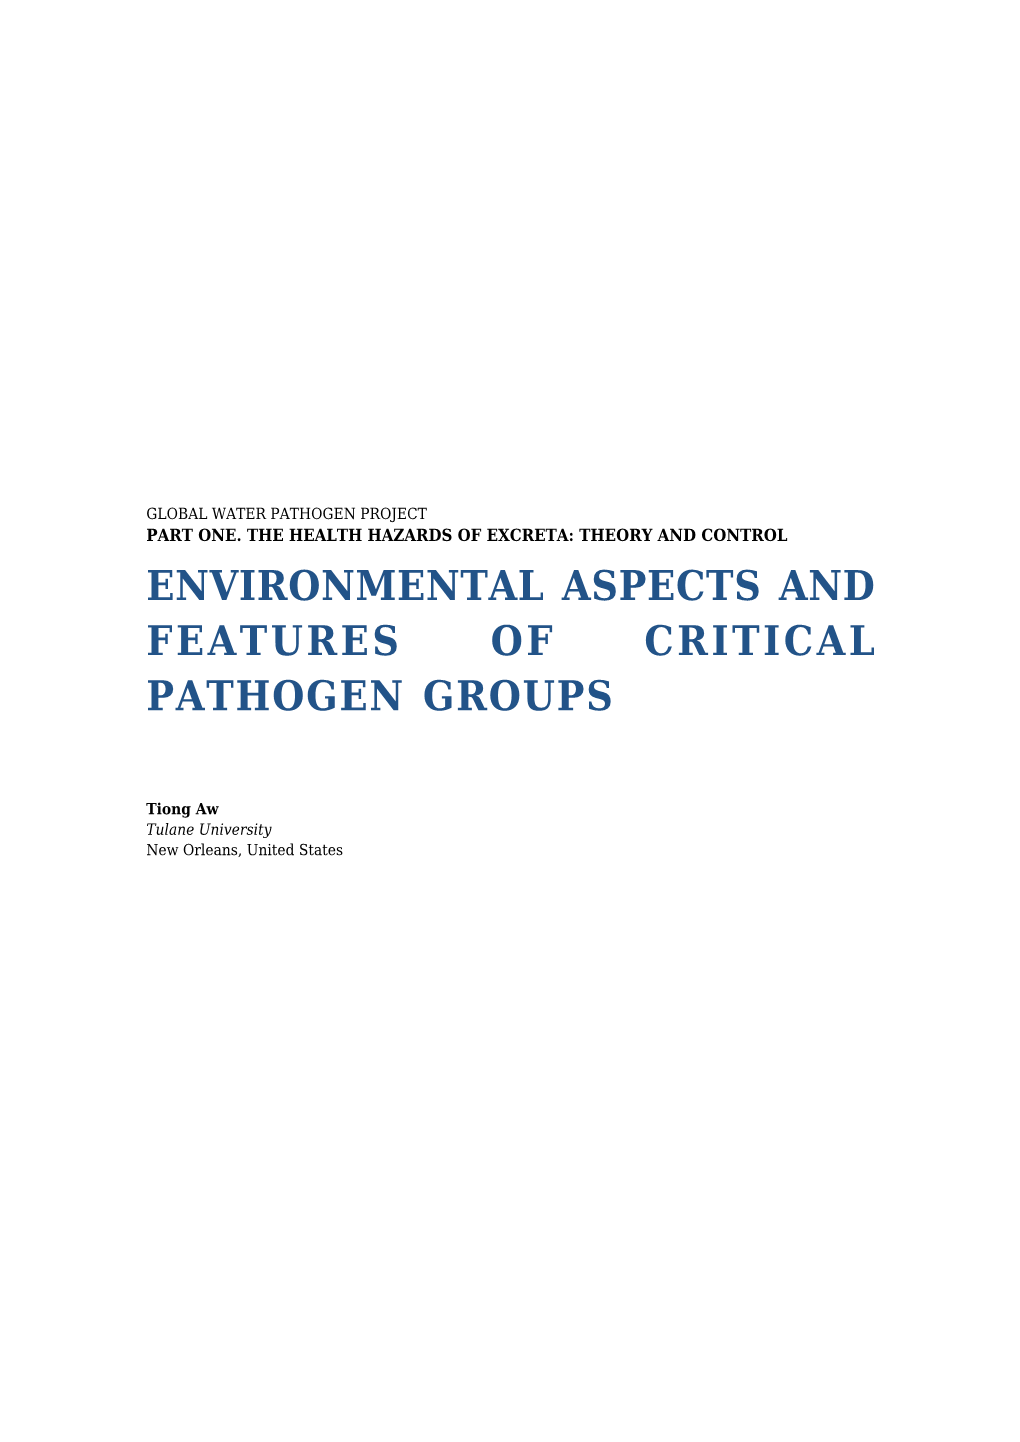 Environmental Aspects and Features of Critical Pathogen Groups